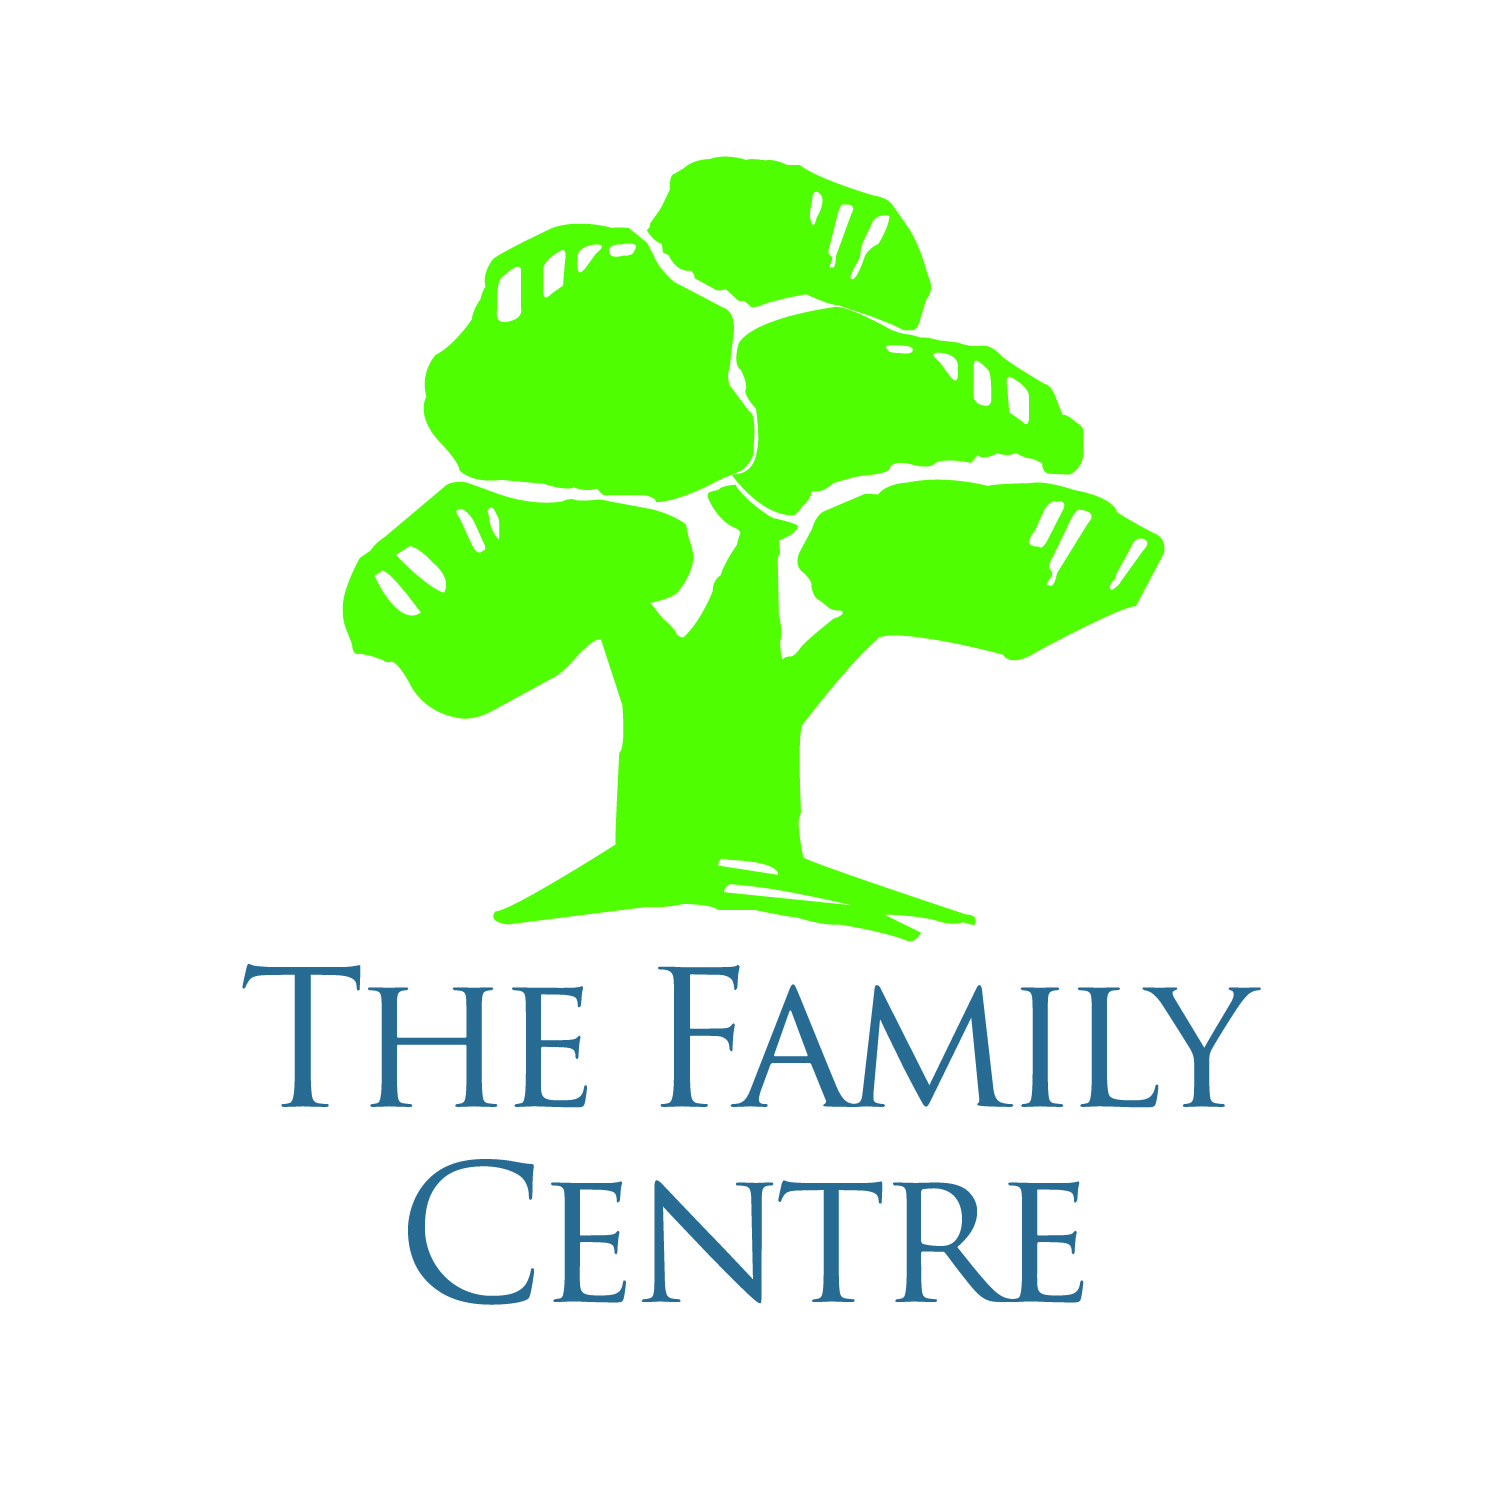 THE FAMILY CENTRE OF NORTHERN ALBERTA (ASSOCIATION) logo